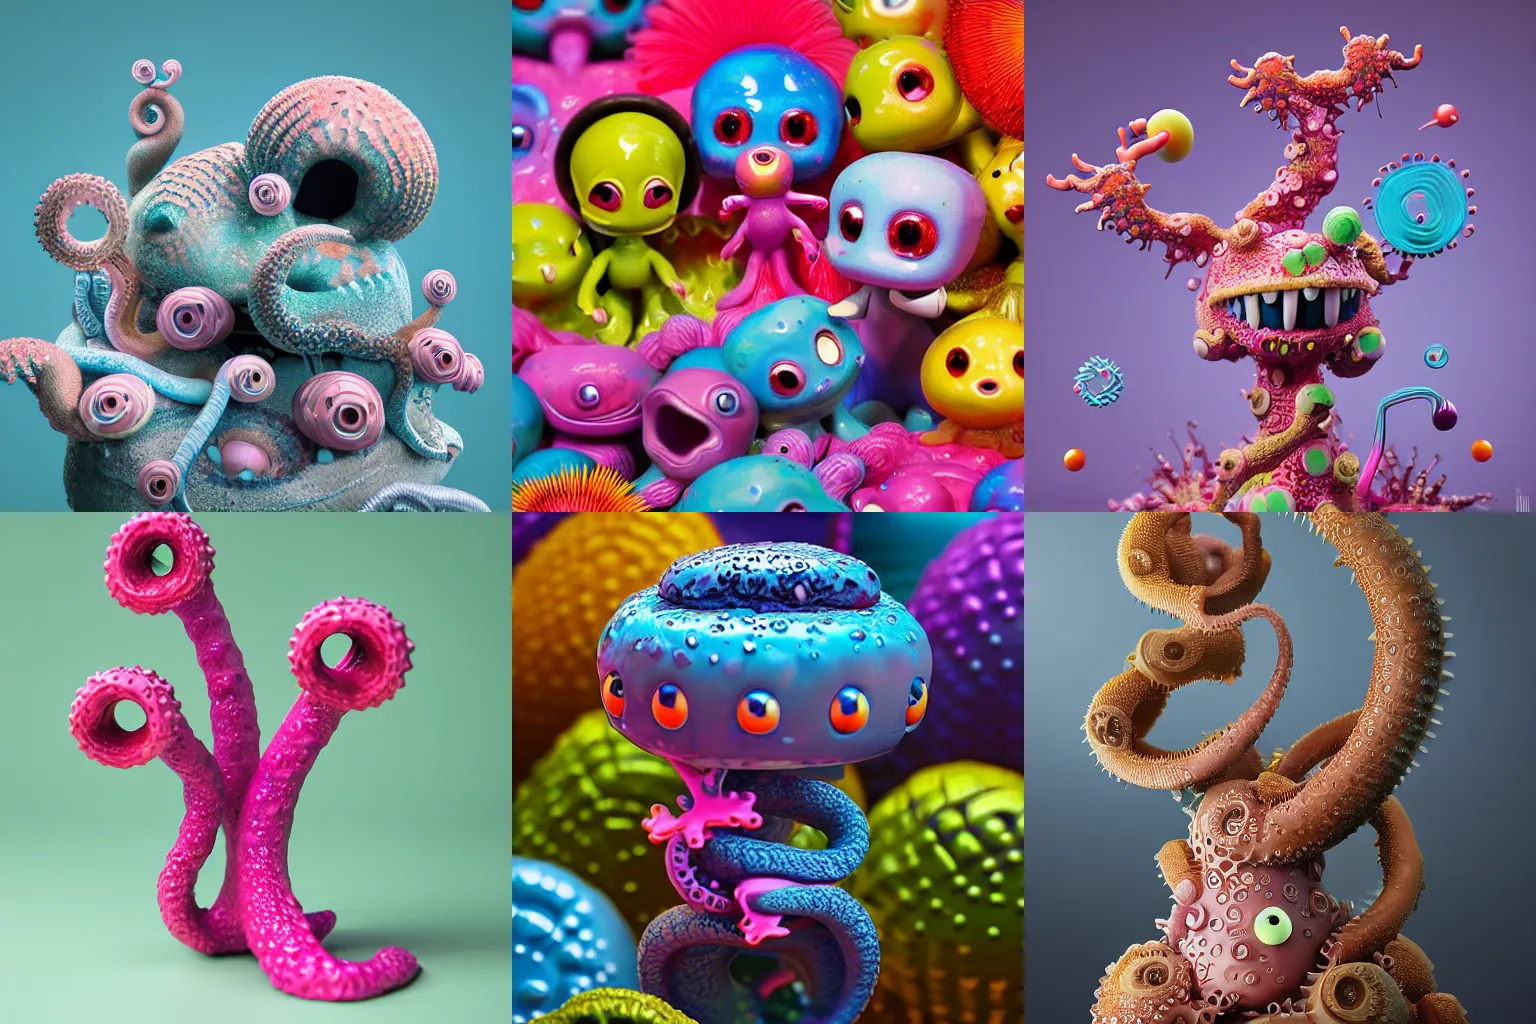 Prompt: ebay product, cute, cute, cute, cute, cute, cute, cute, miniature resine figure, High detail photography, 8K, 3d fractals, pictoplasma, one simple ceramic tintoy tentacle monster Figure sculpture, surrounded by splashes, 3d primitives, in a Studio hollow, by pixar, by jonathan ive, simulation